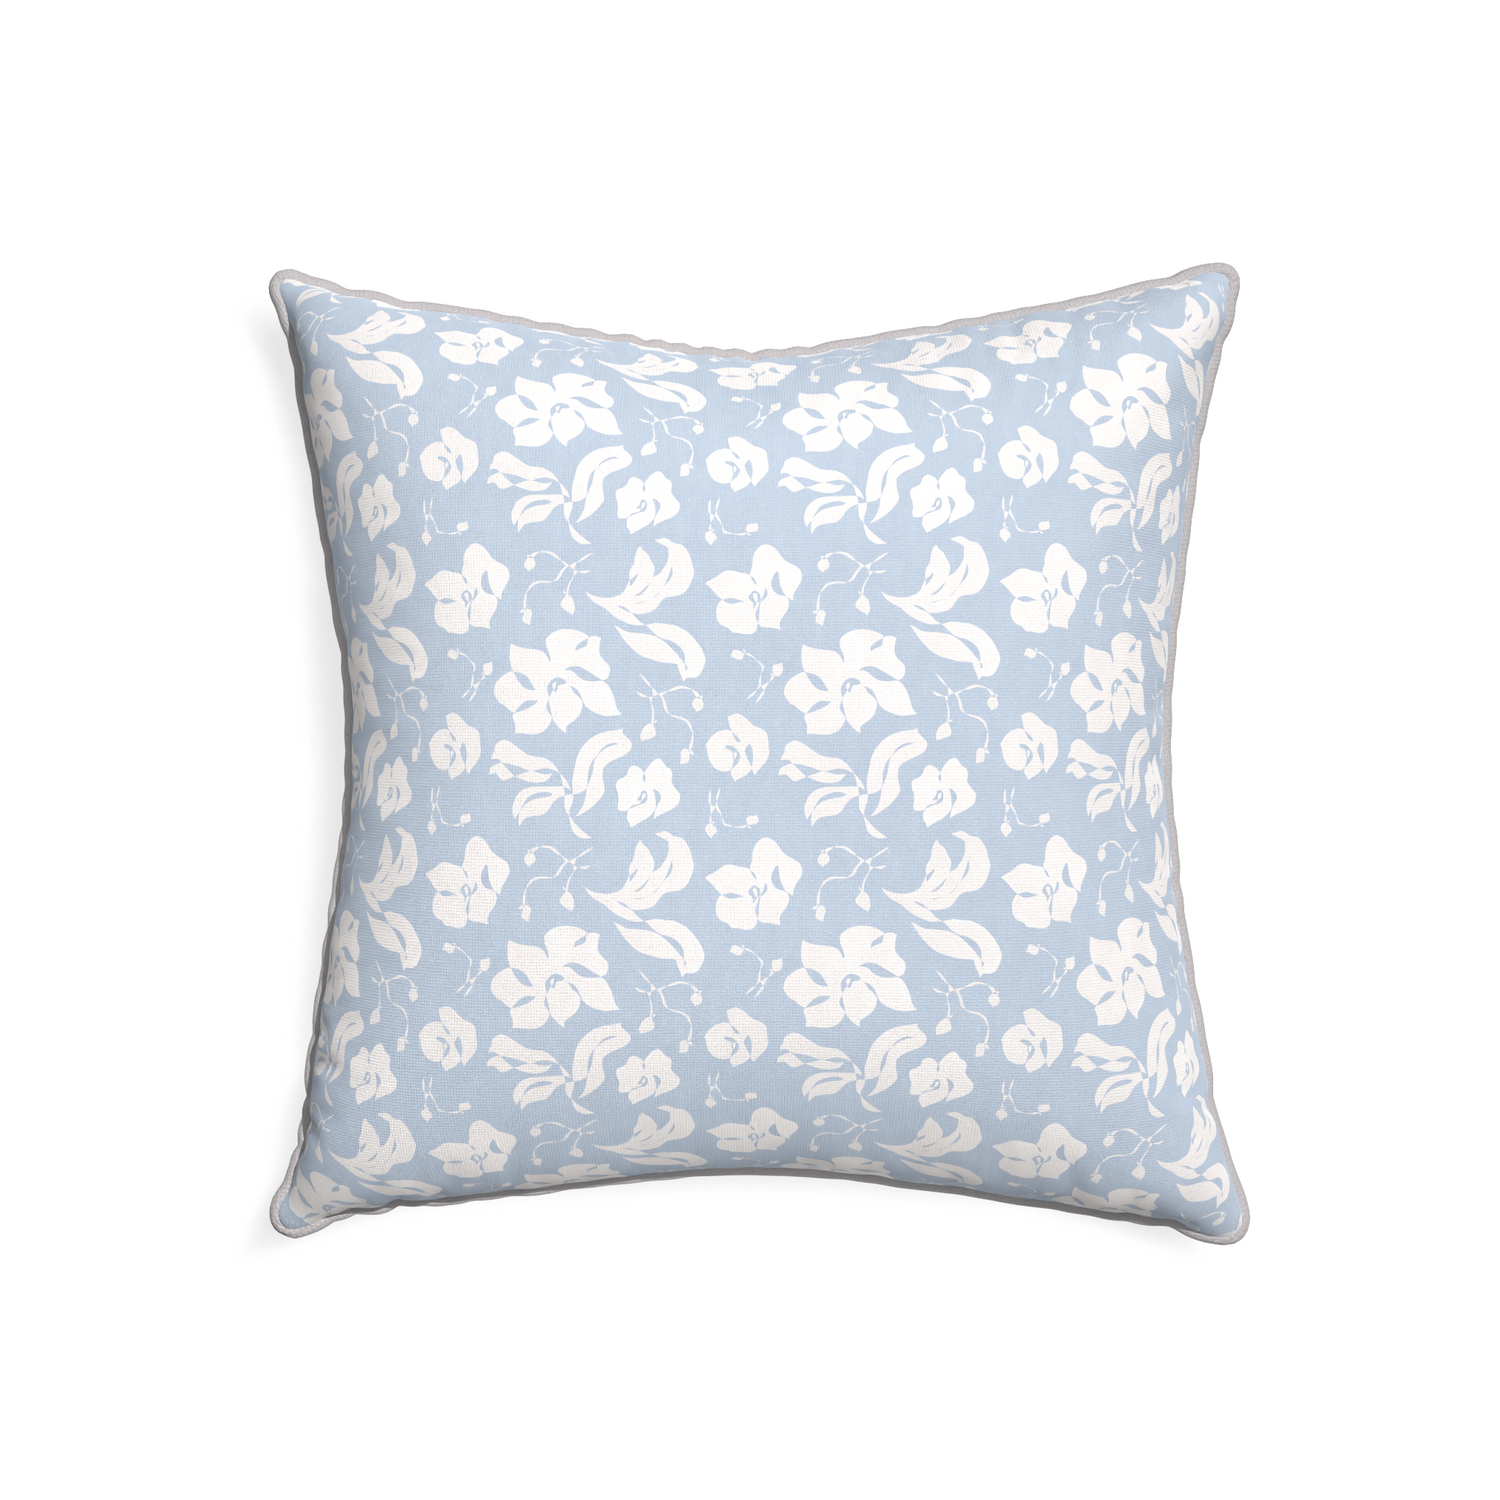 22-square georgia custom cornflower blue floralpillow with pebble piping on white background